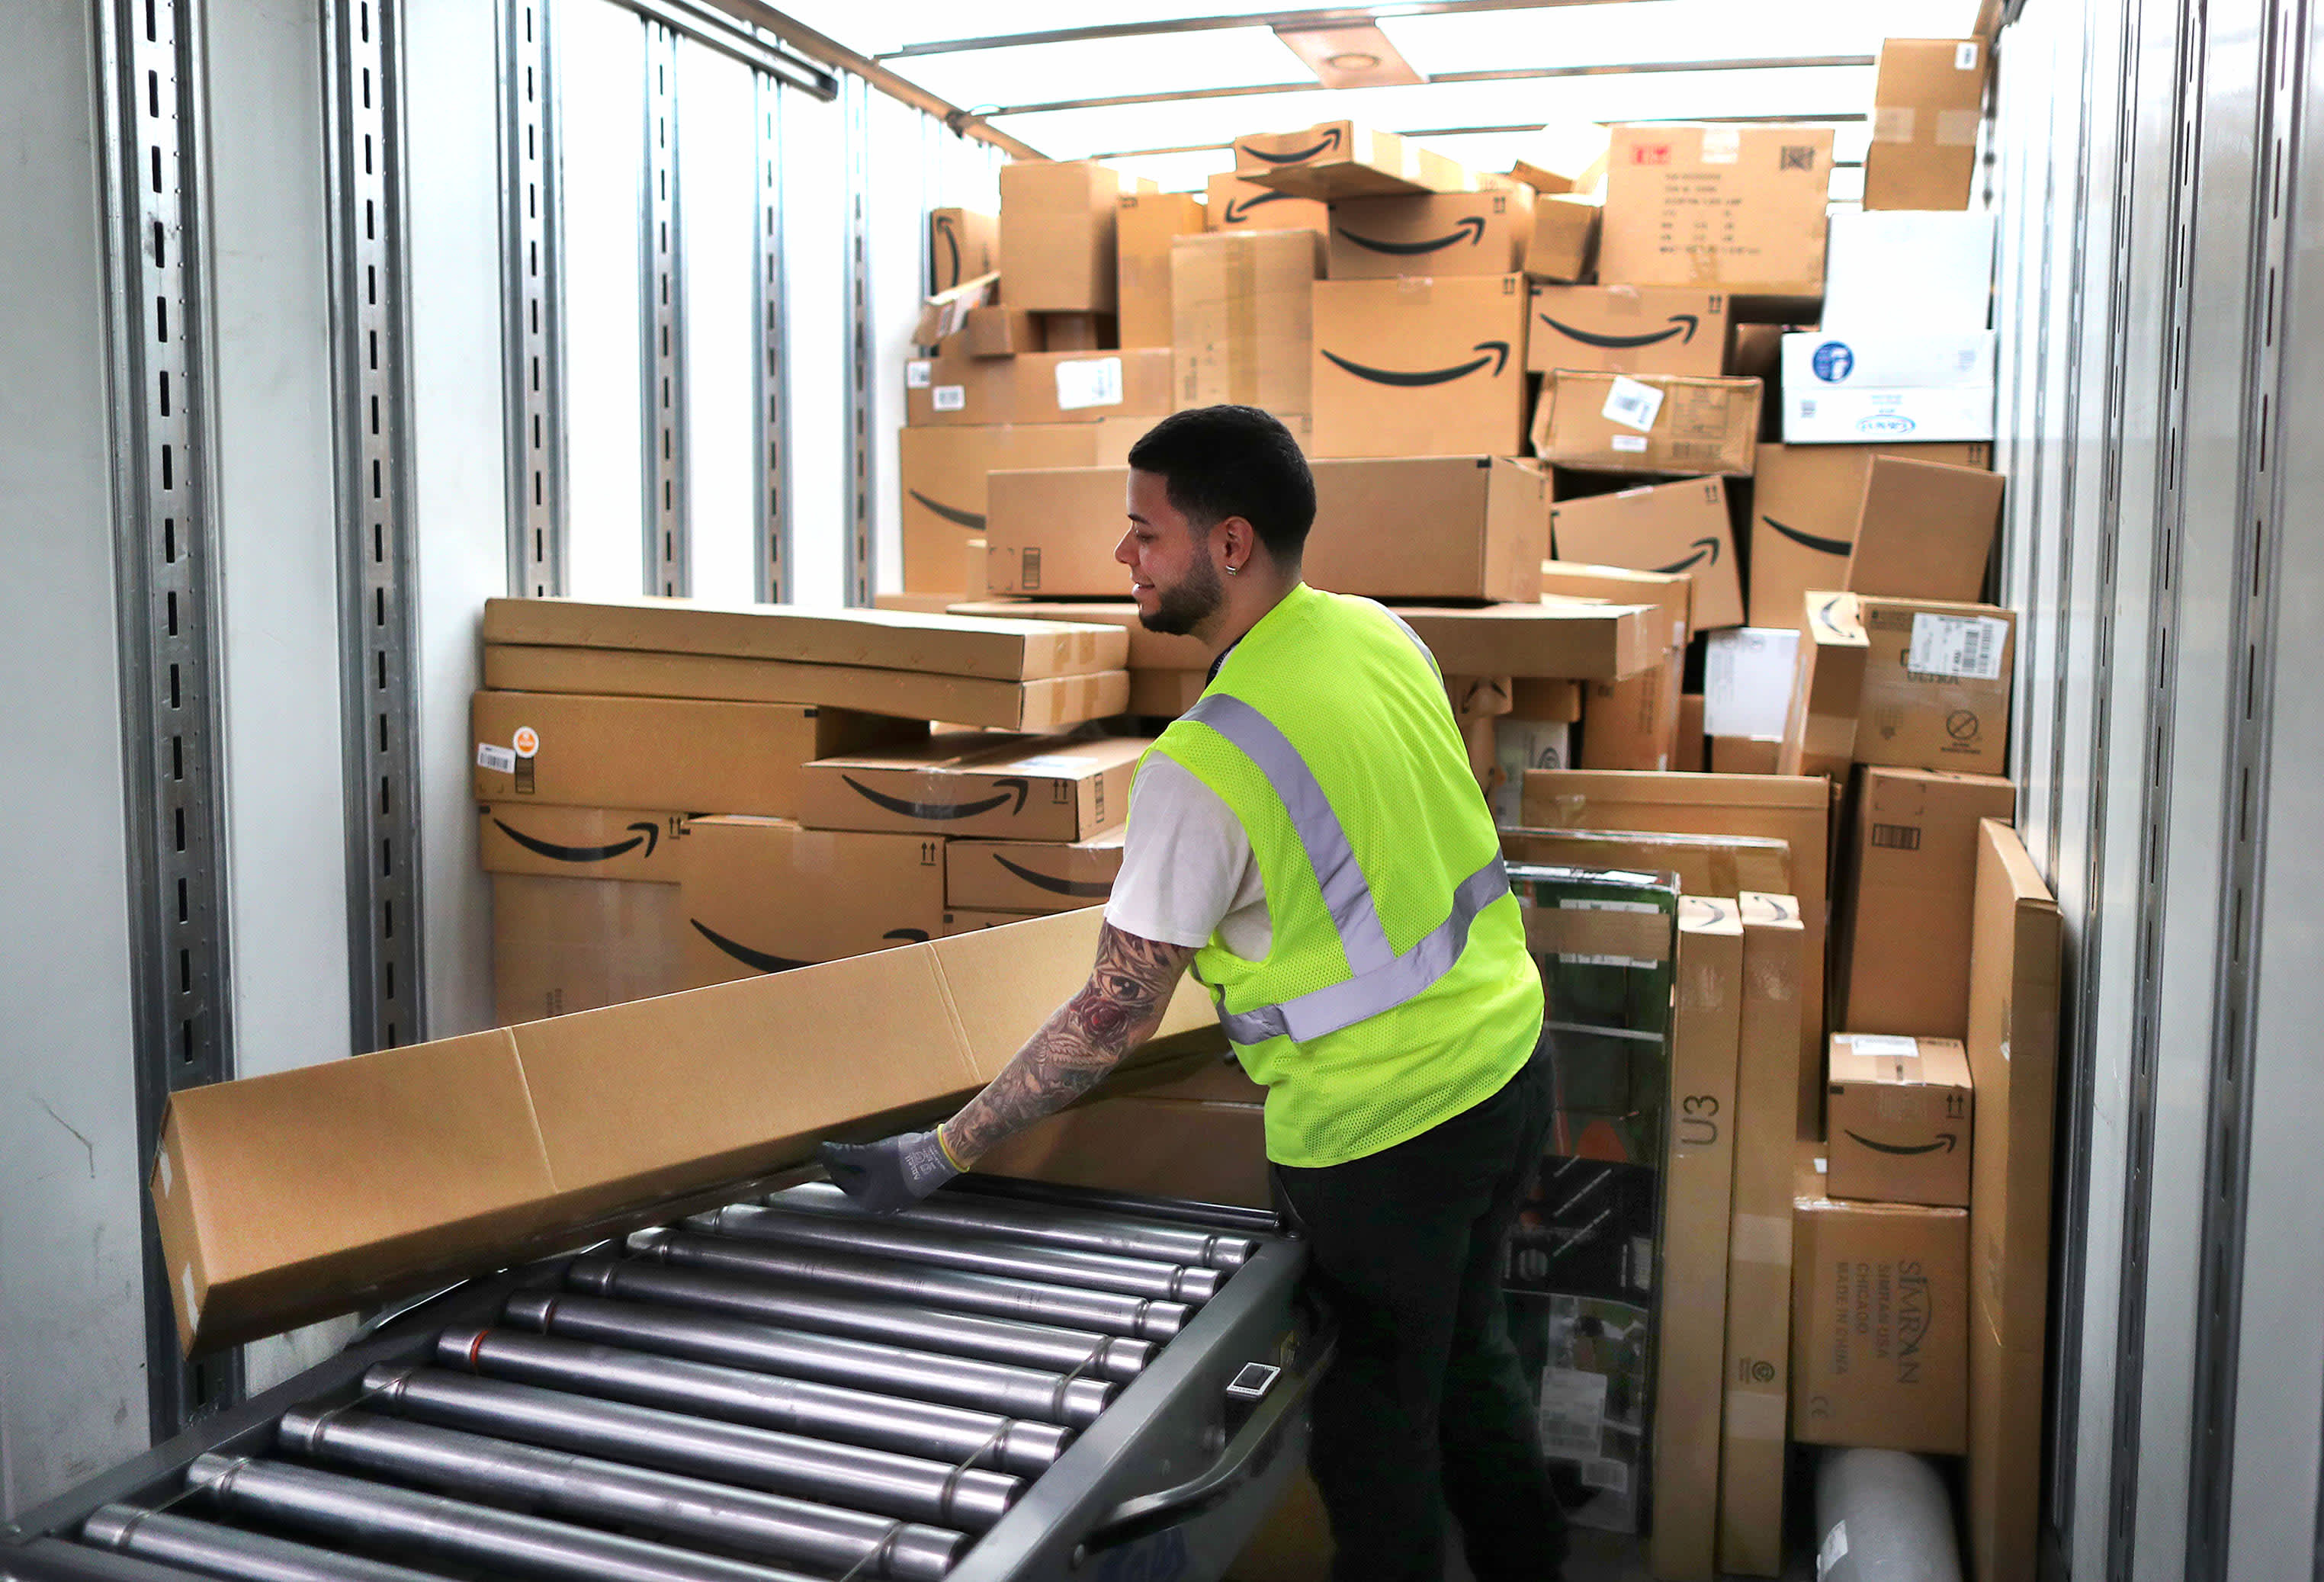 How Many Orders Does Amazon Get Every Second, Minute & Hour?